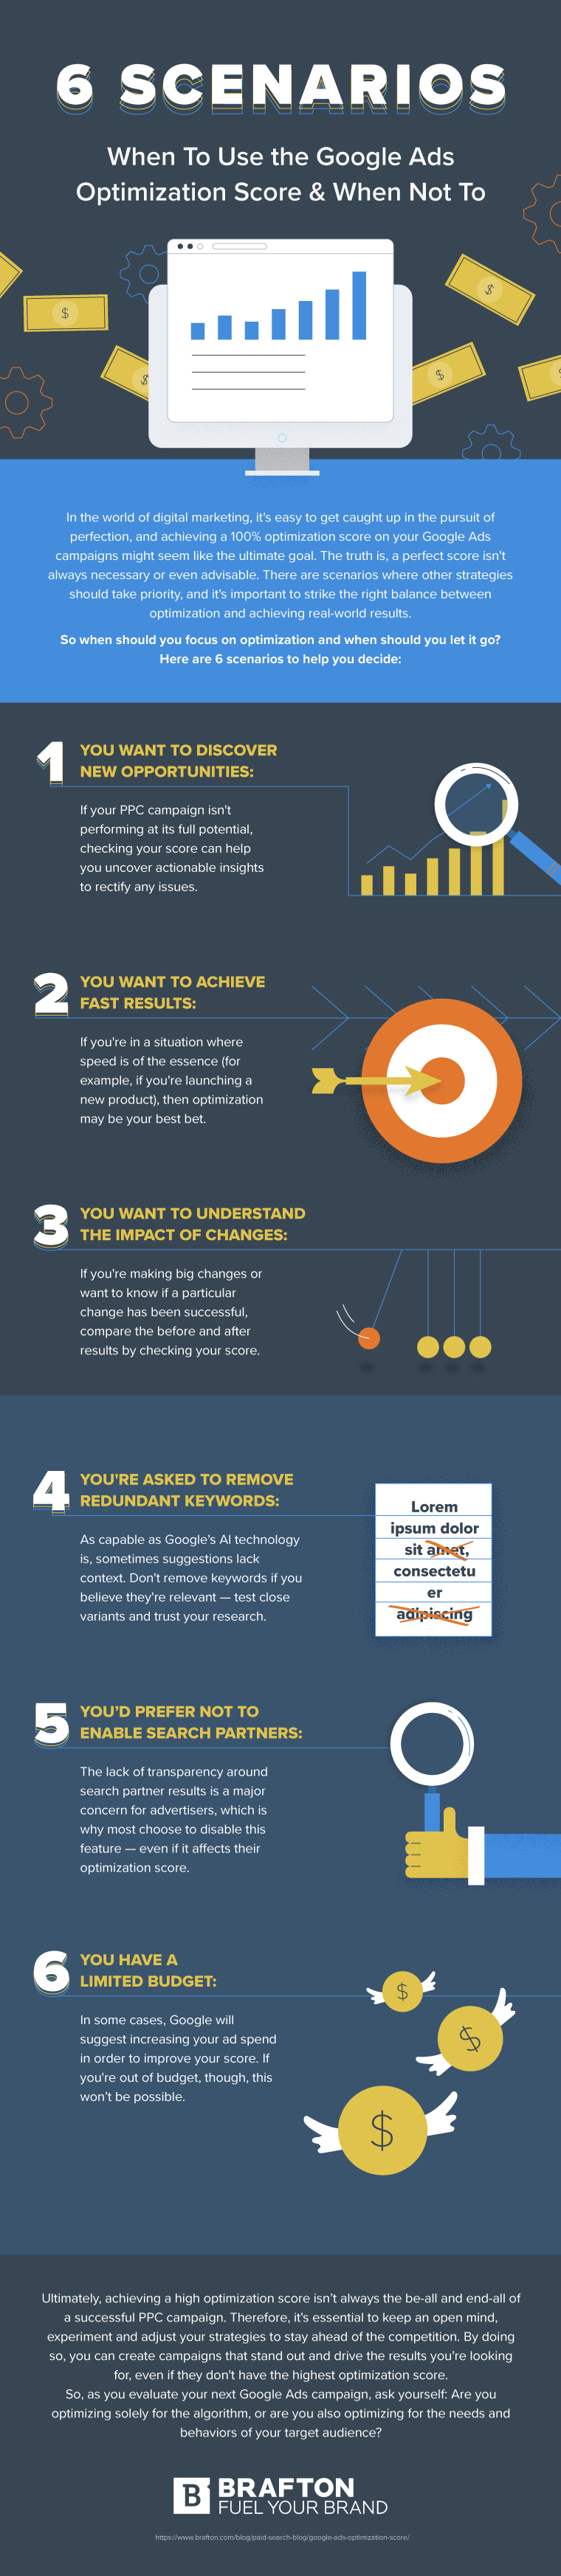 6 Scenarios When to use the Google Ads Optimization Score & when not to Infographic